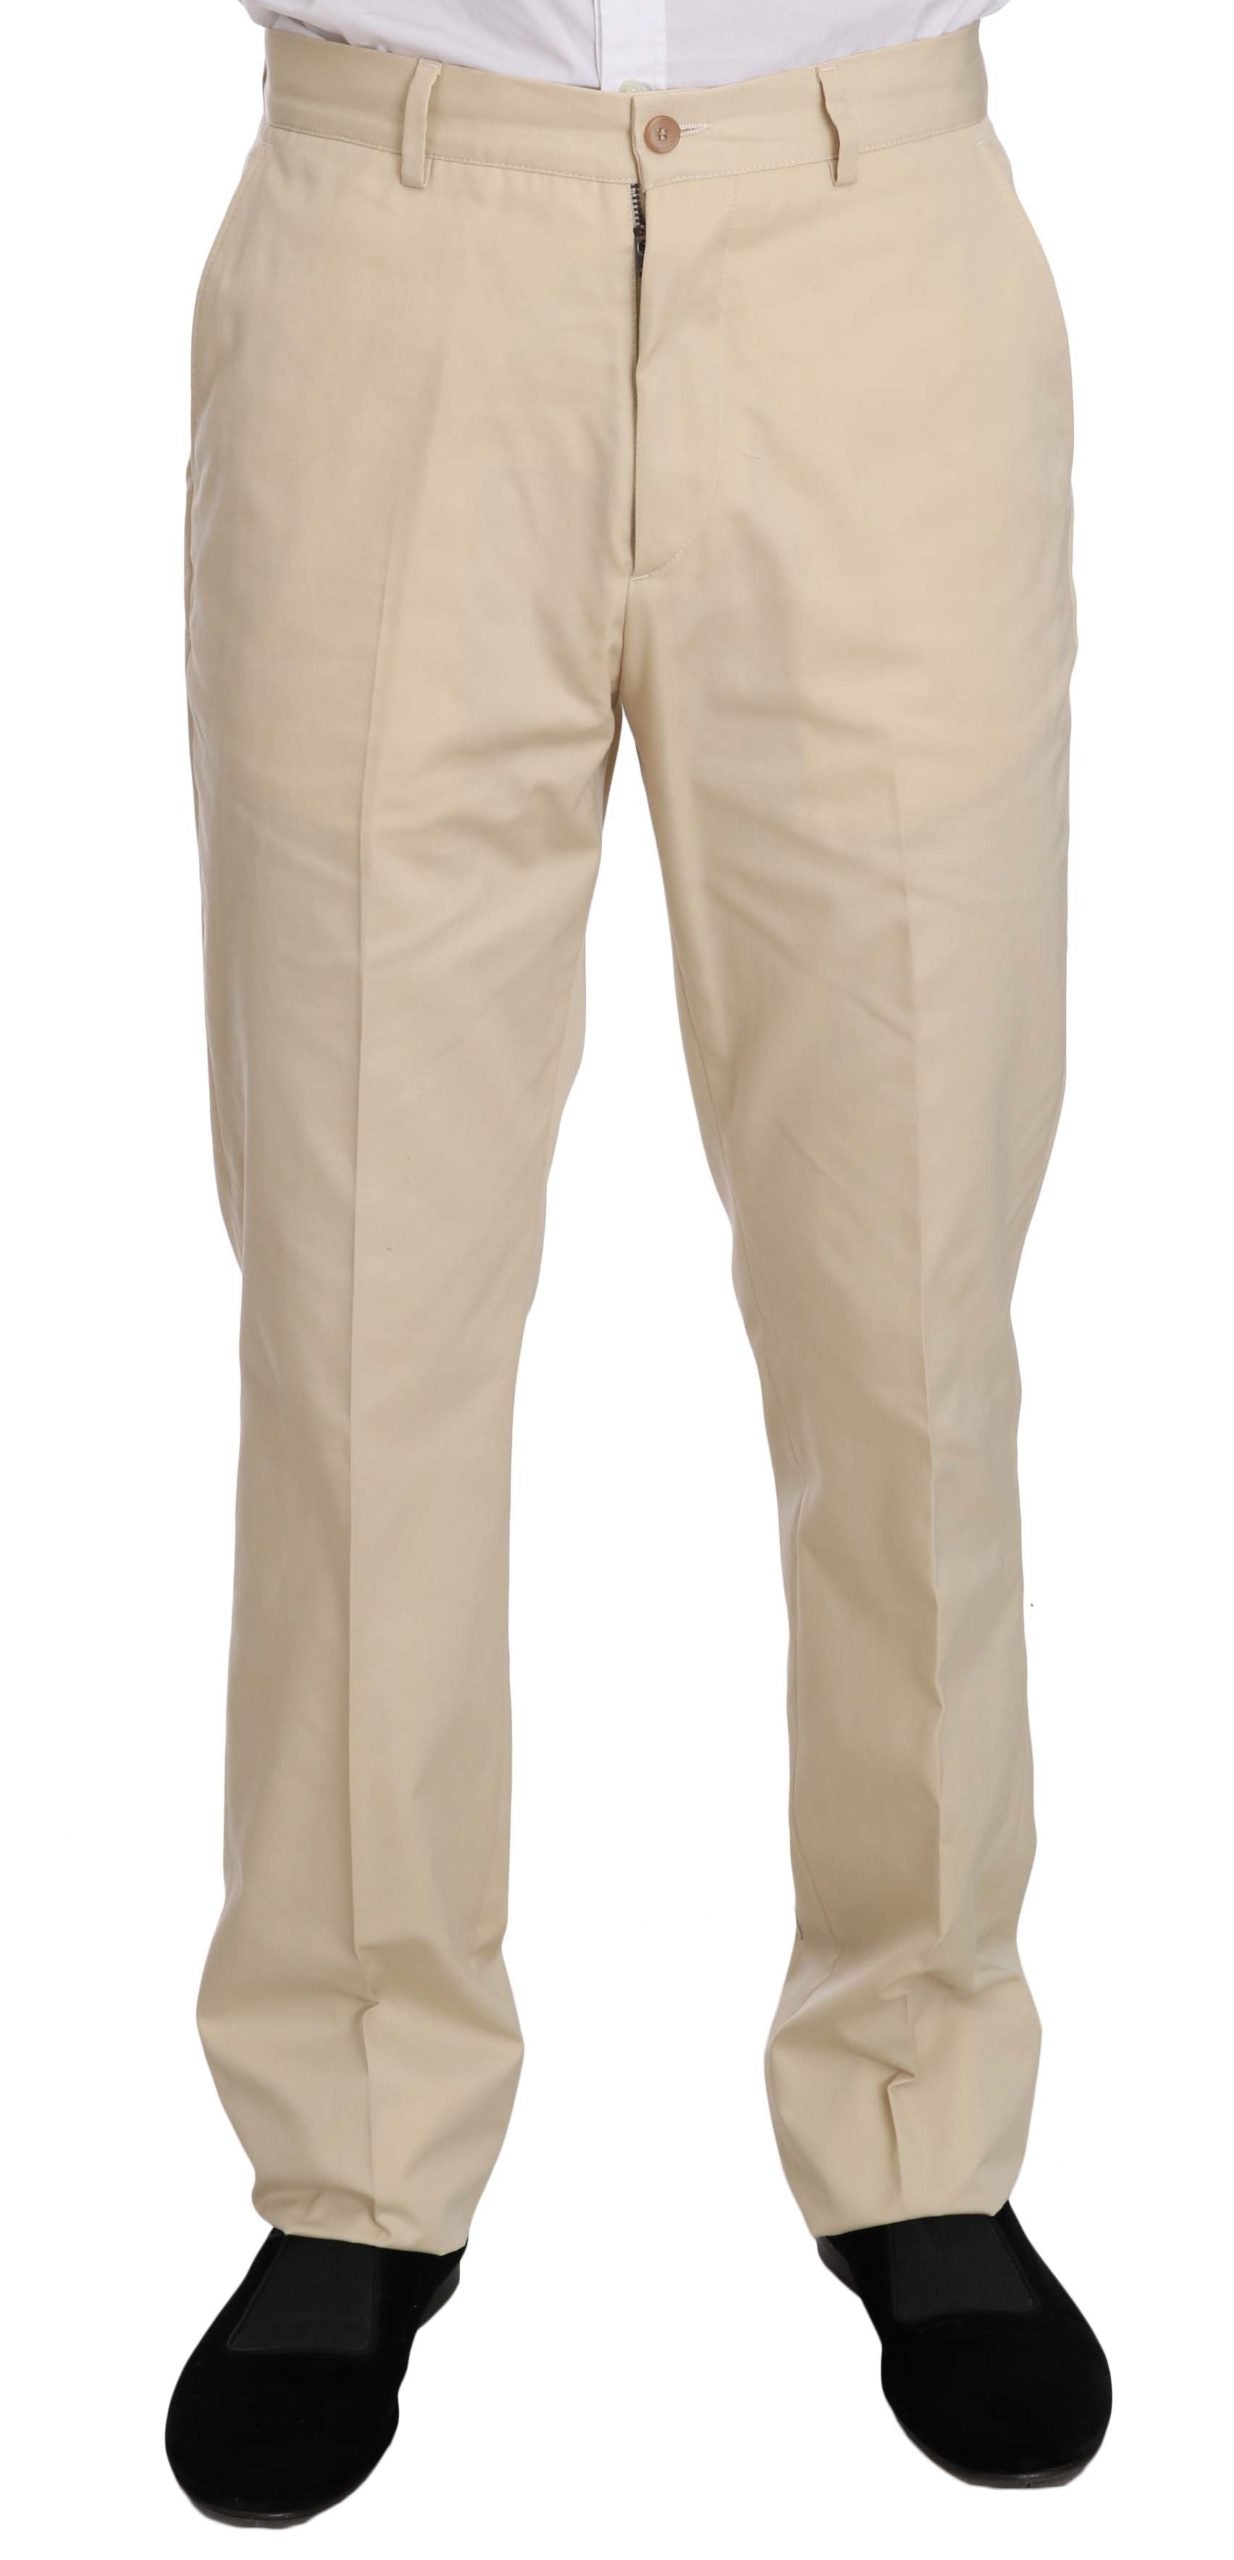 Romeo Gigli Two Piece 3 Button Beige Cotton Solid Suit